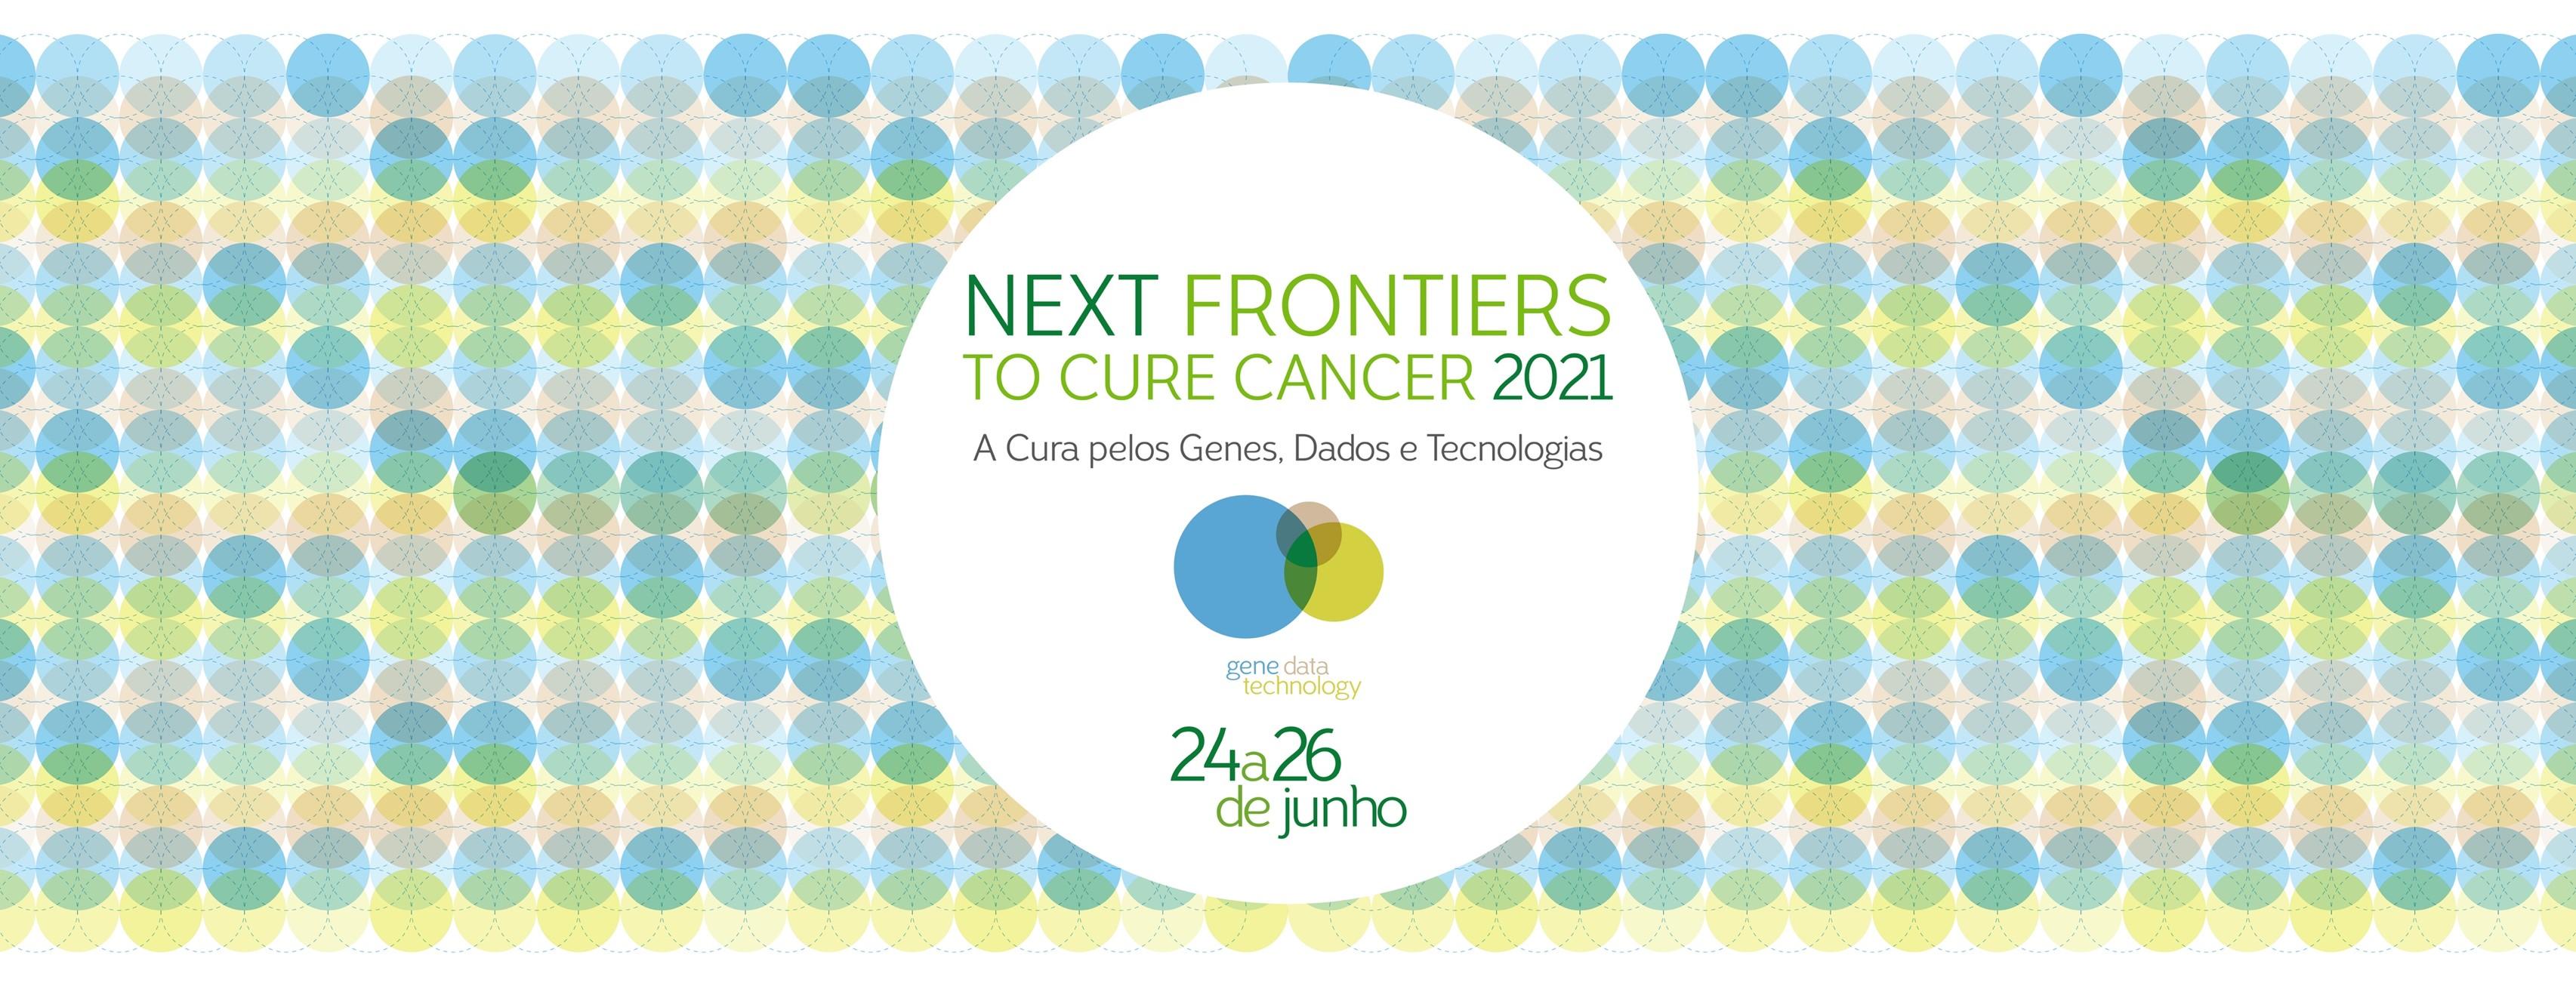 Logotipo Next Frontiers to Cure Cancer 2021